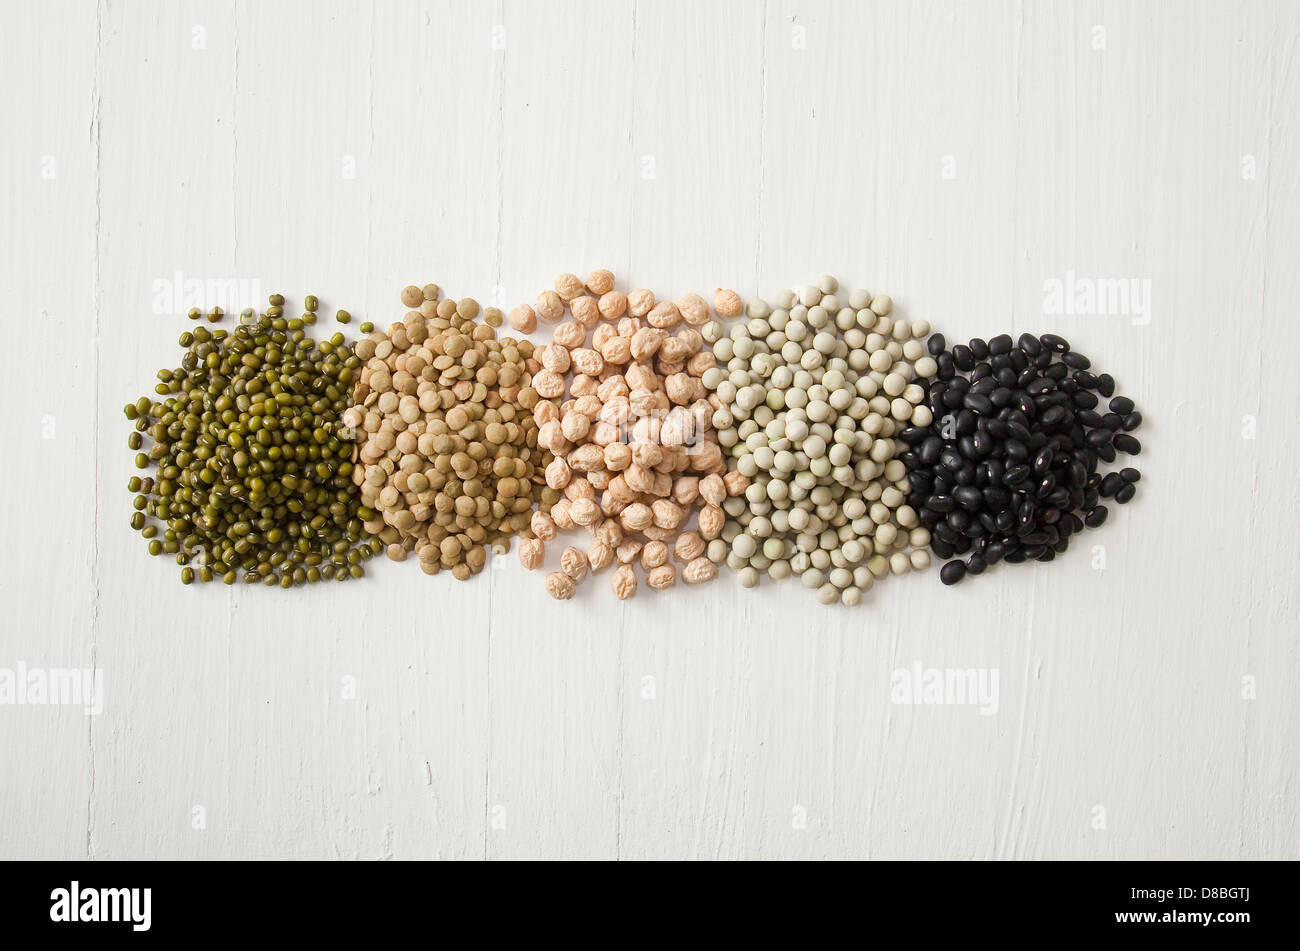 Piles of peas, beans, lentils, sprouts and pulses in a line on a rustic wood surface. Stock Photo